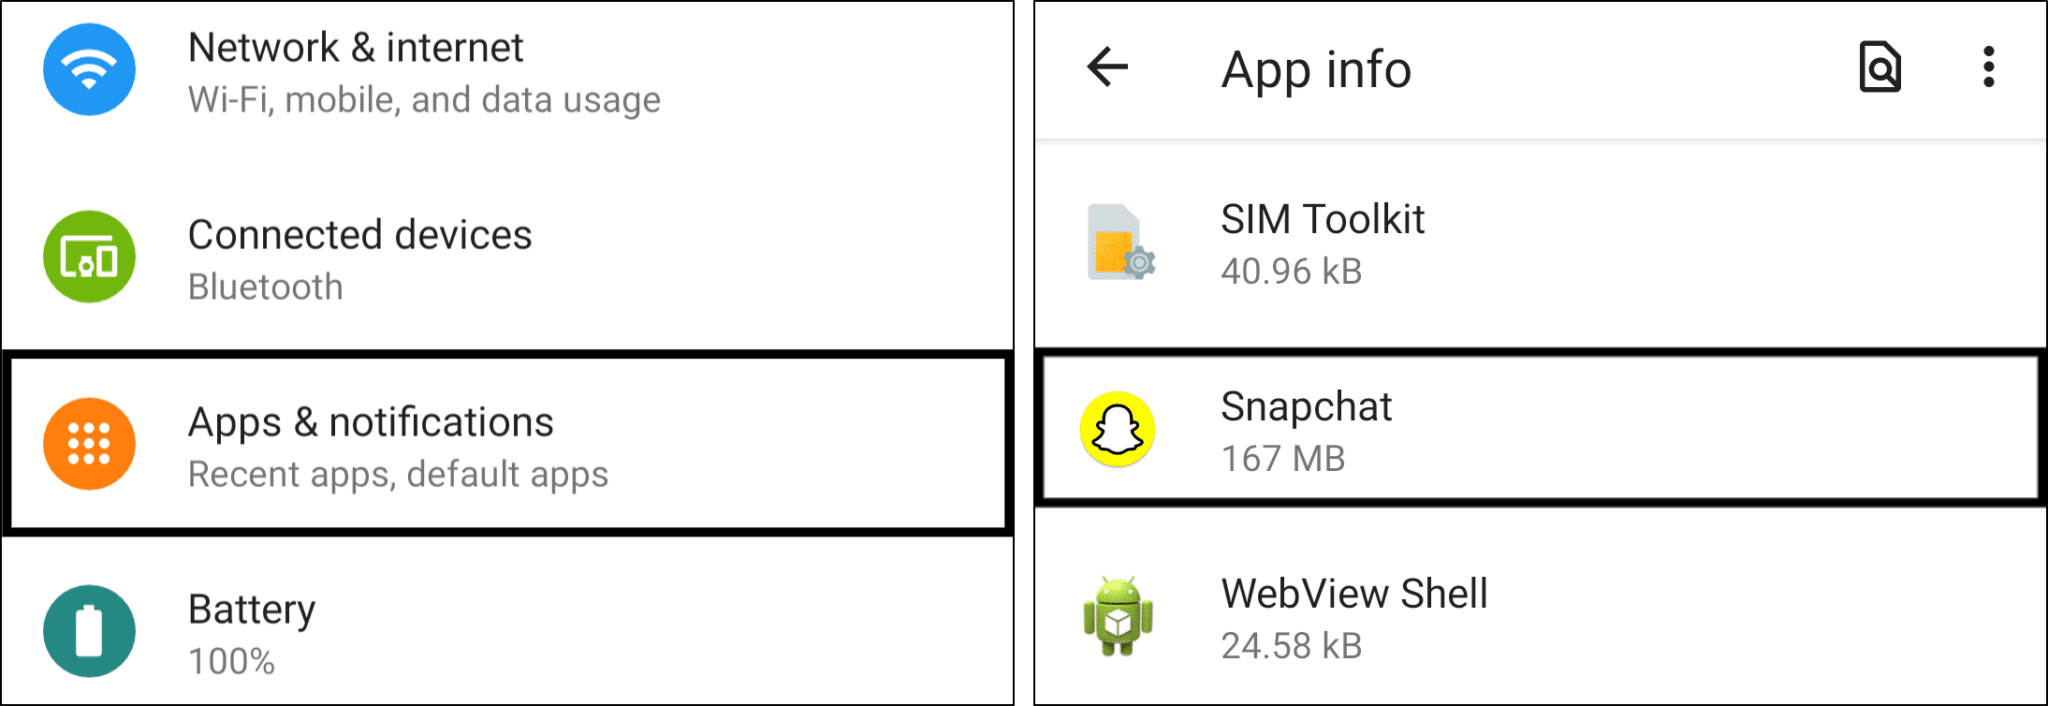 clear snapchat cache through Settings app on Android to fix stories or snaps not showing or loading